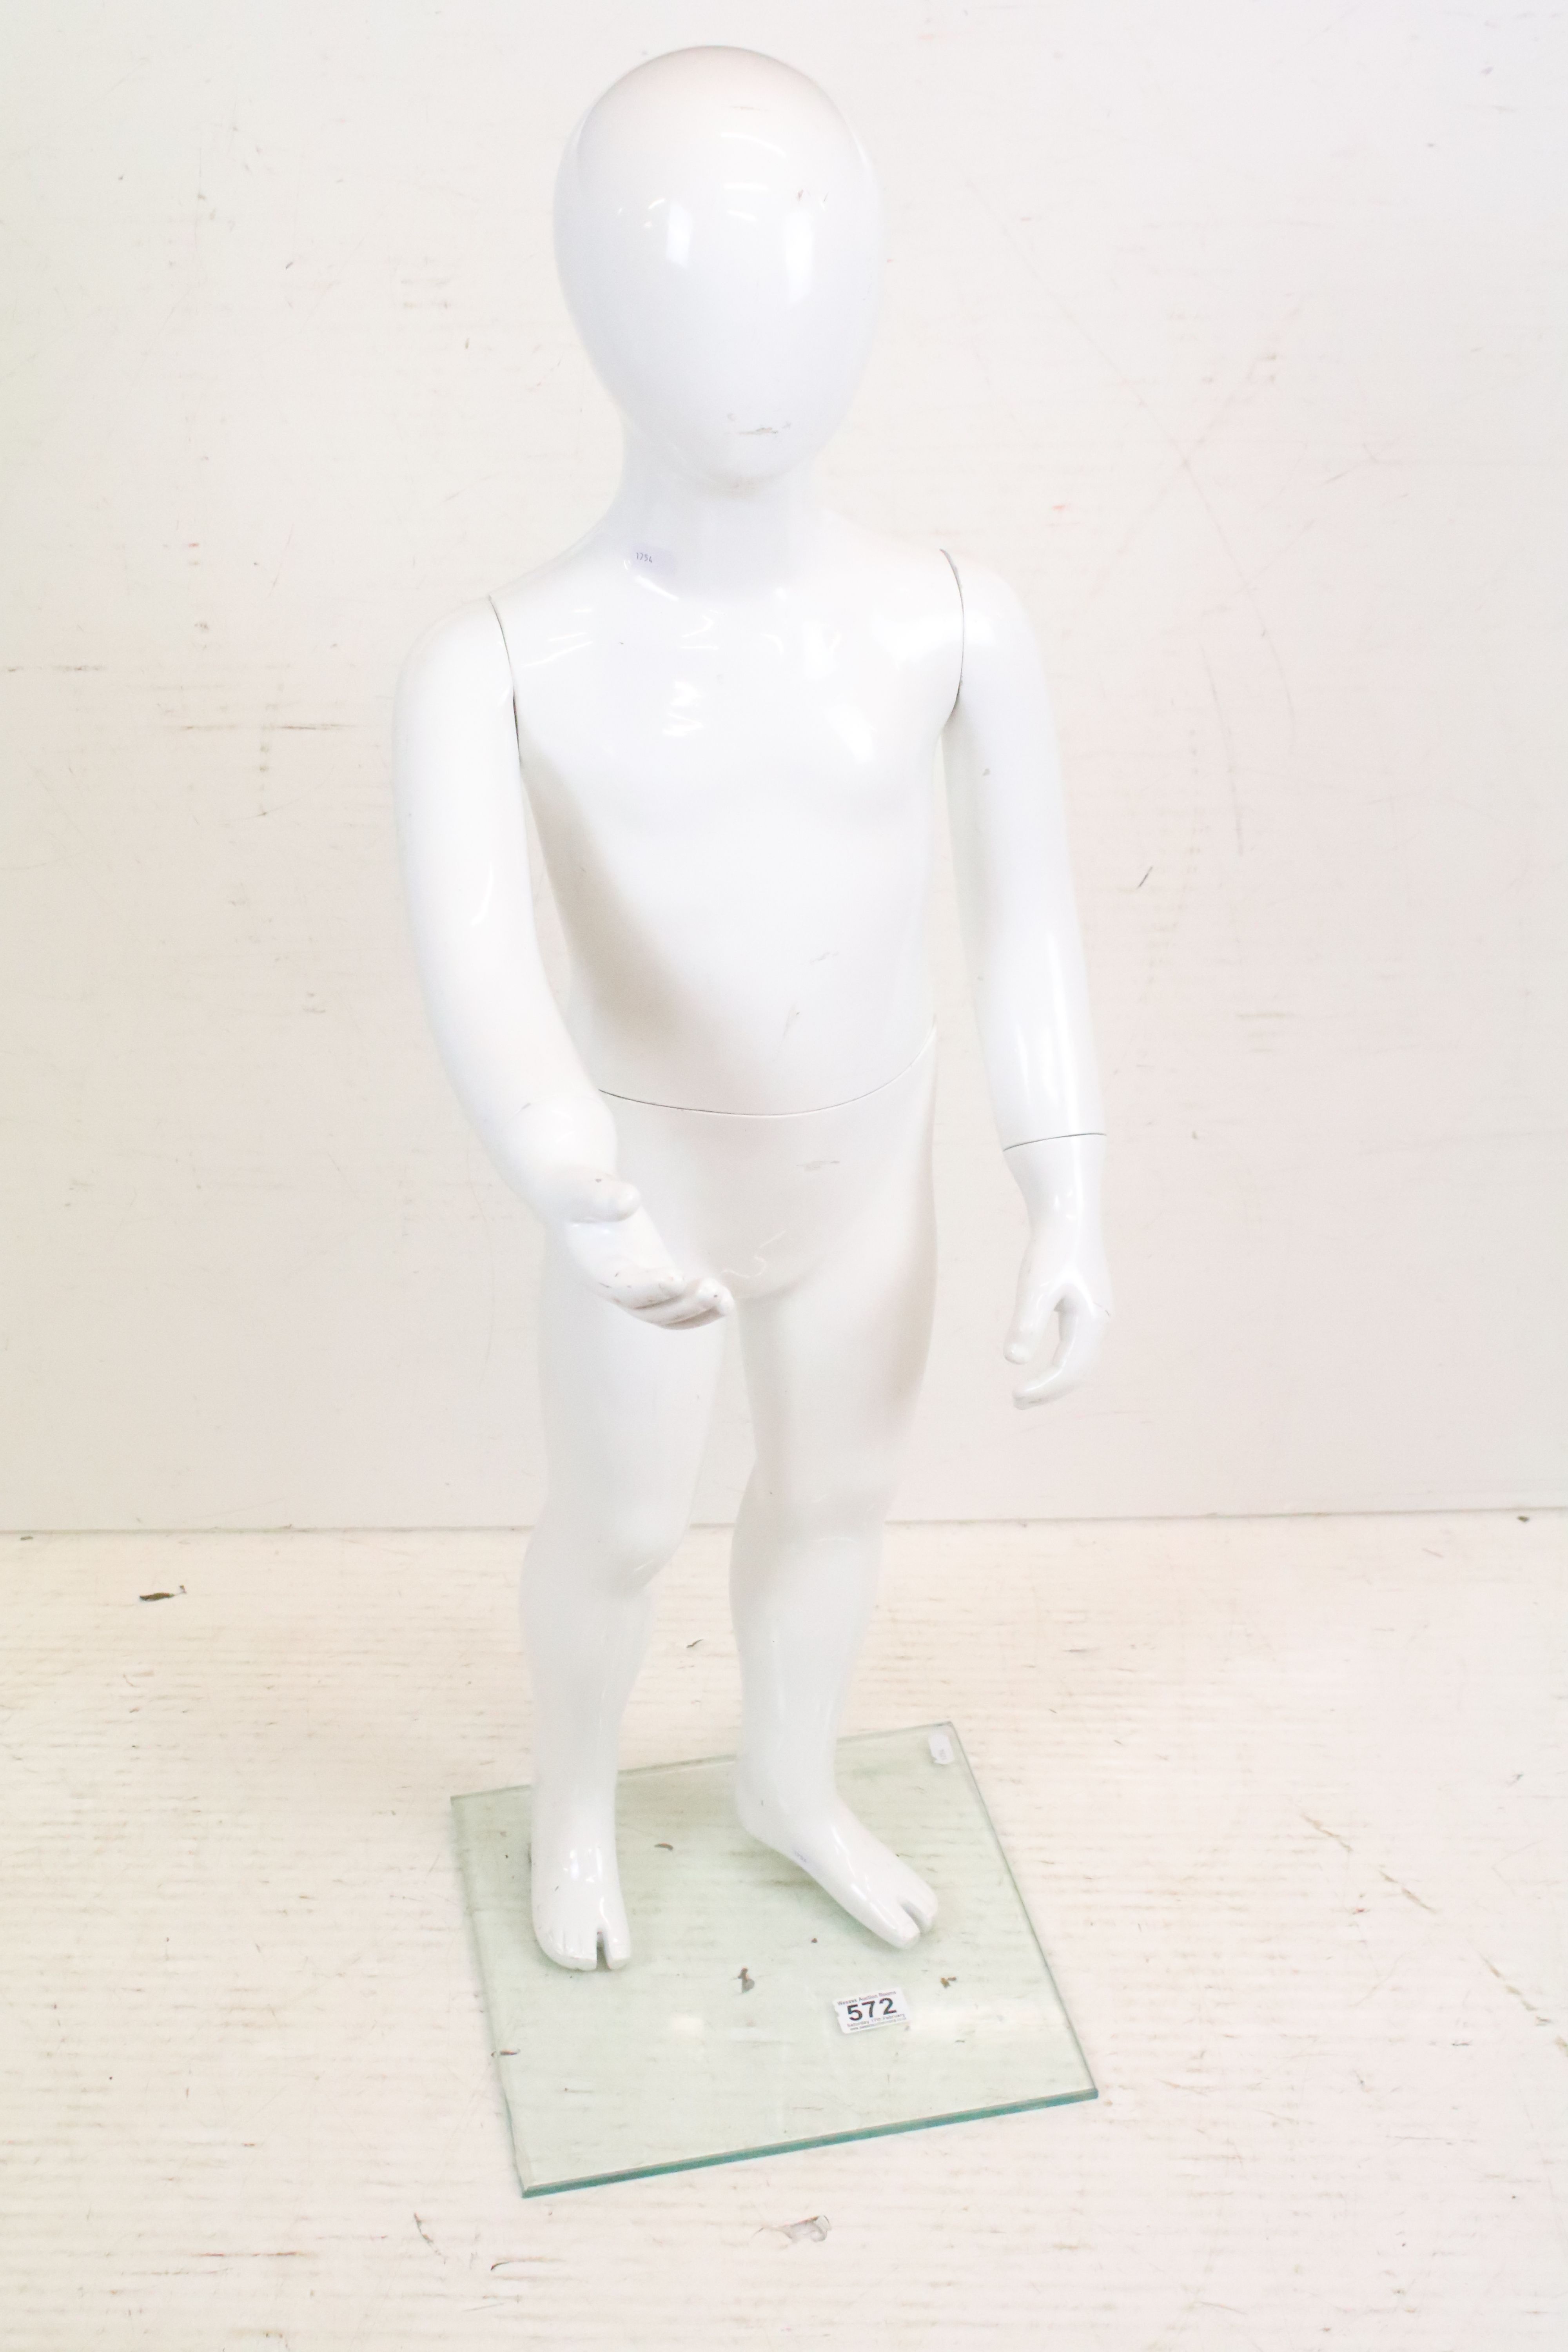 Child Full Size Shop Display Mannequin with plain white finish held on a clear square glass stand,